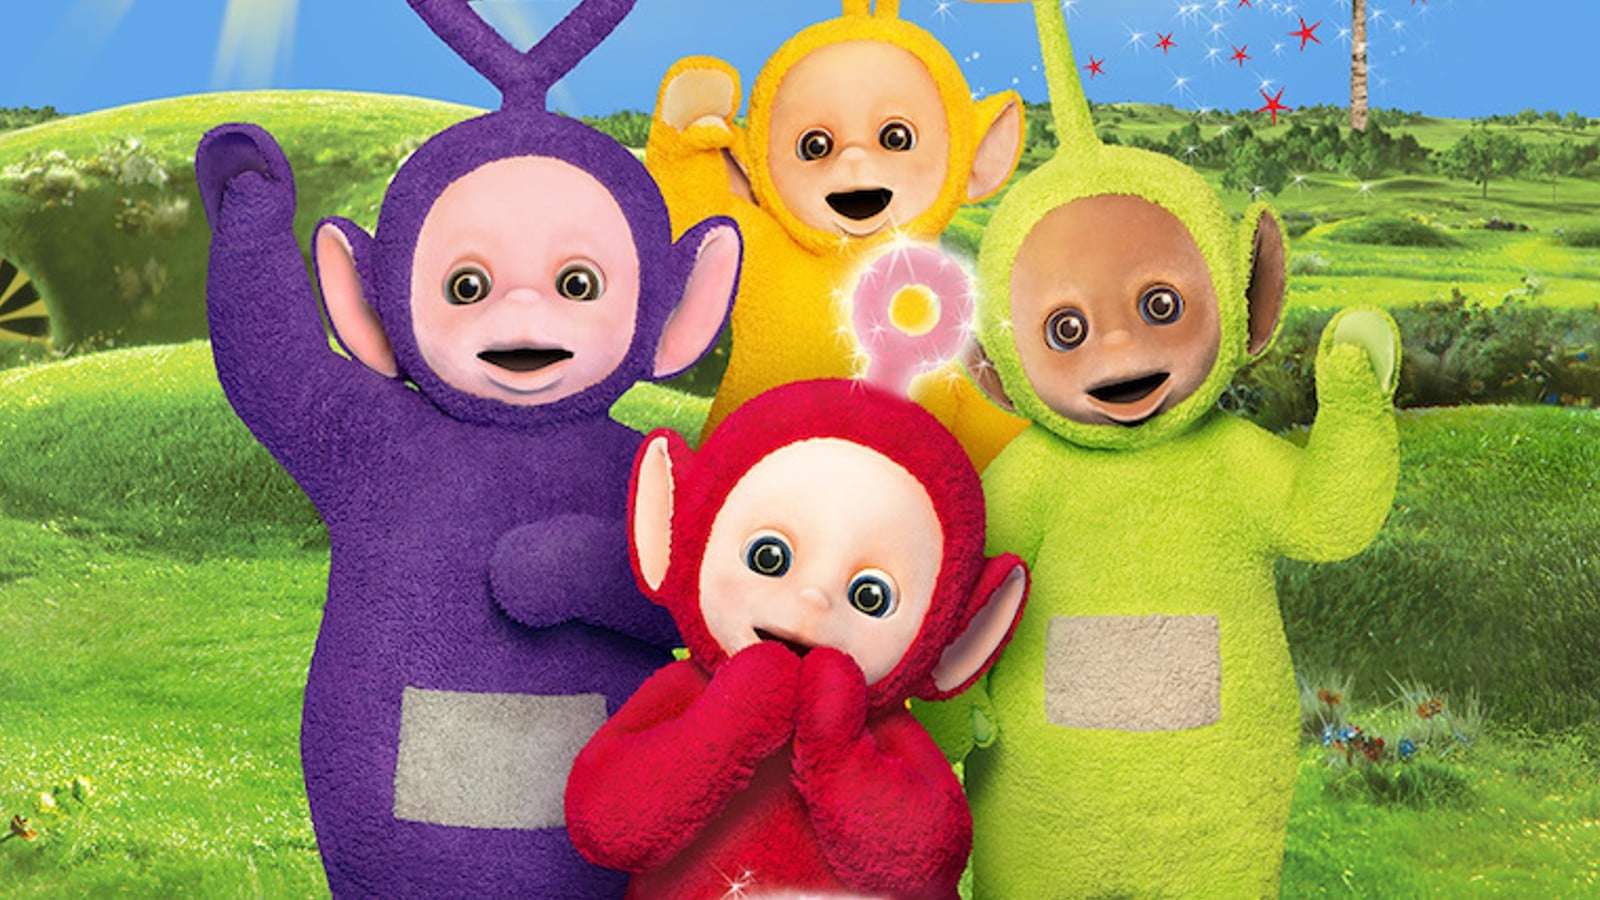 The Teletubbies in the Netflix reboot